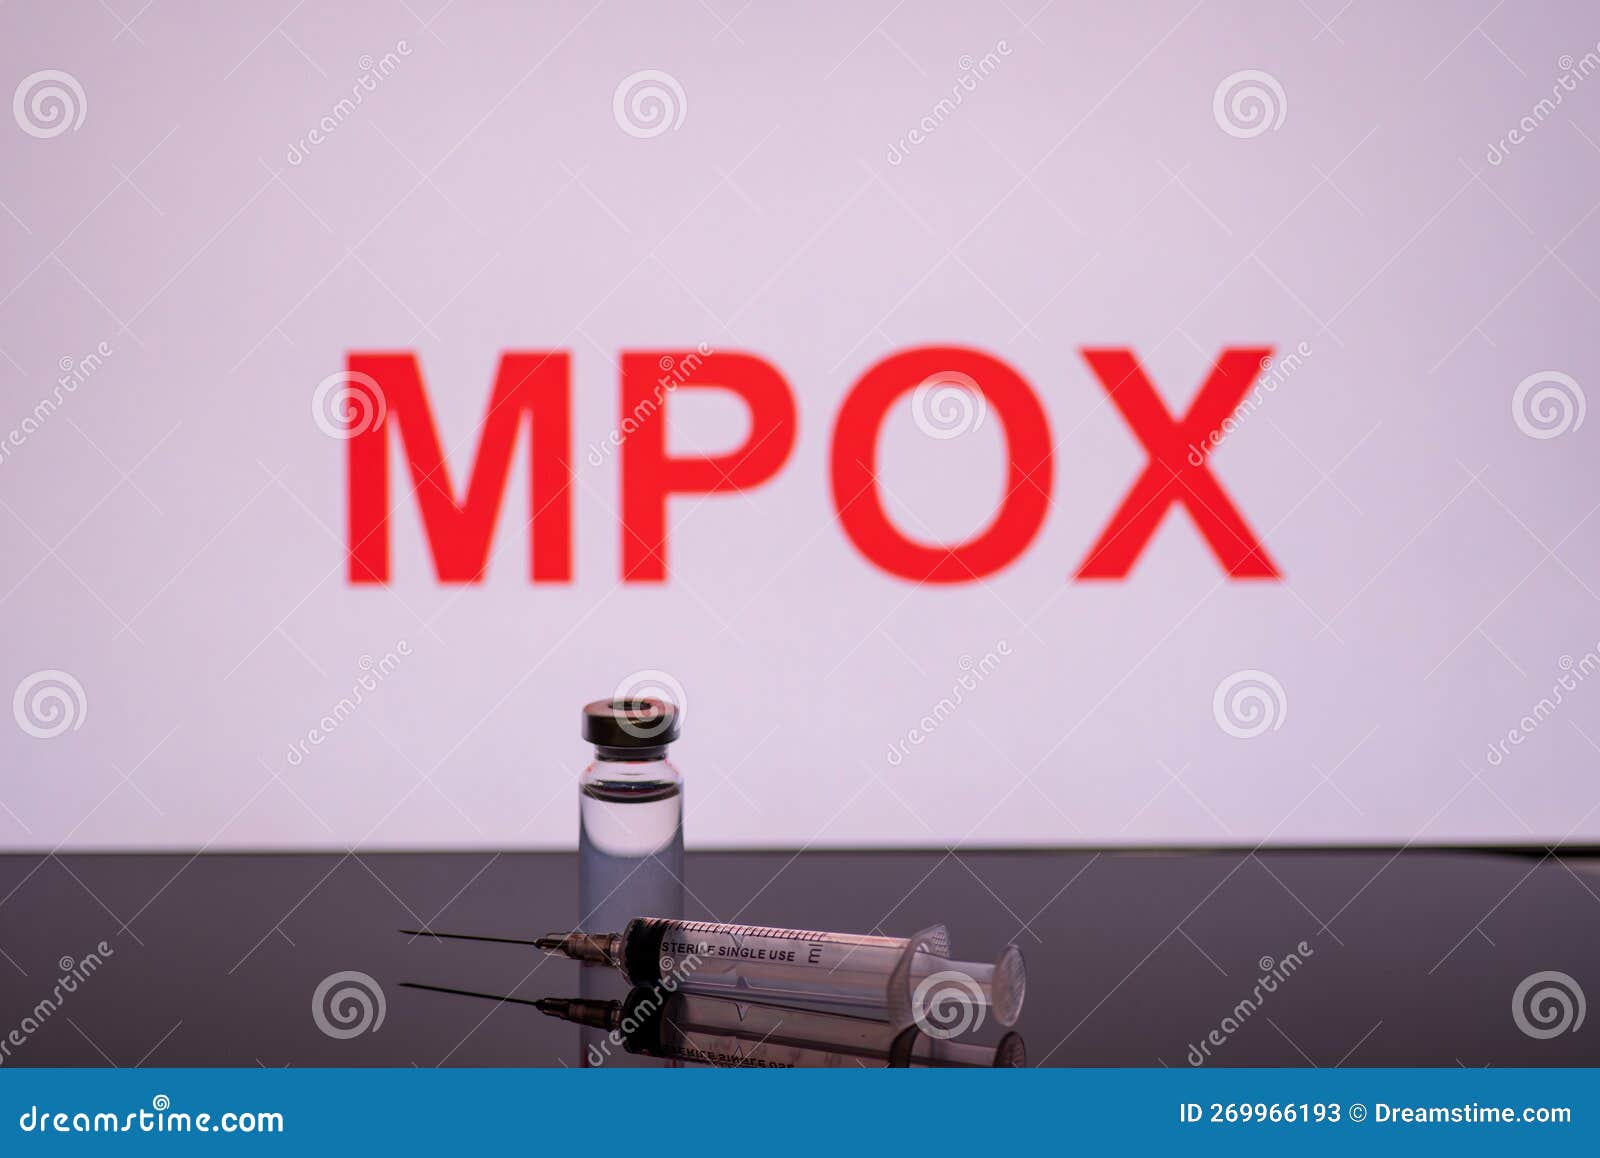 background of mpox ,medical health concept